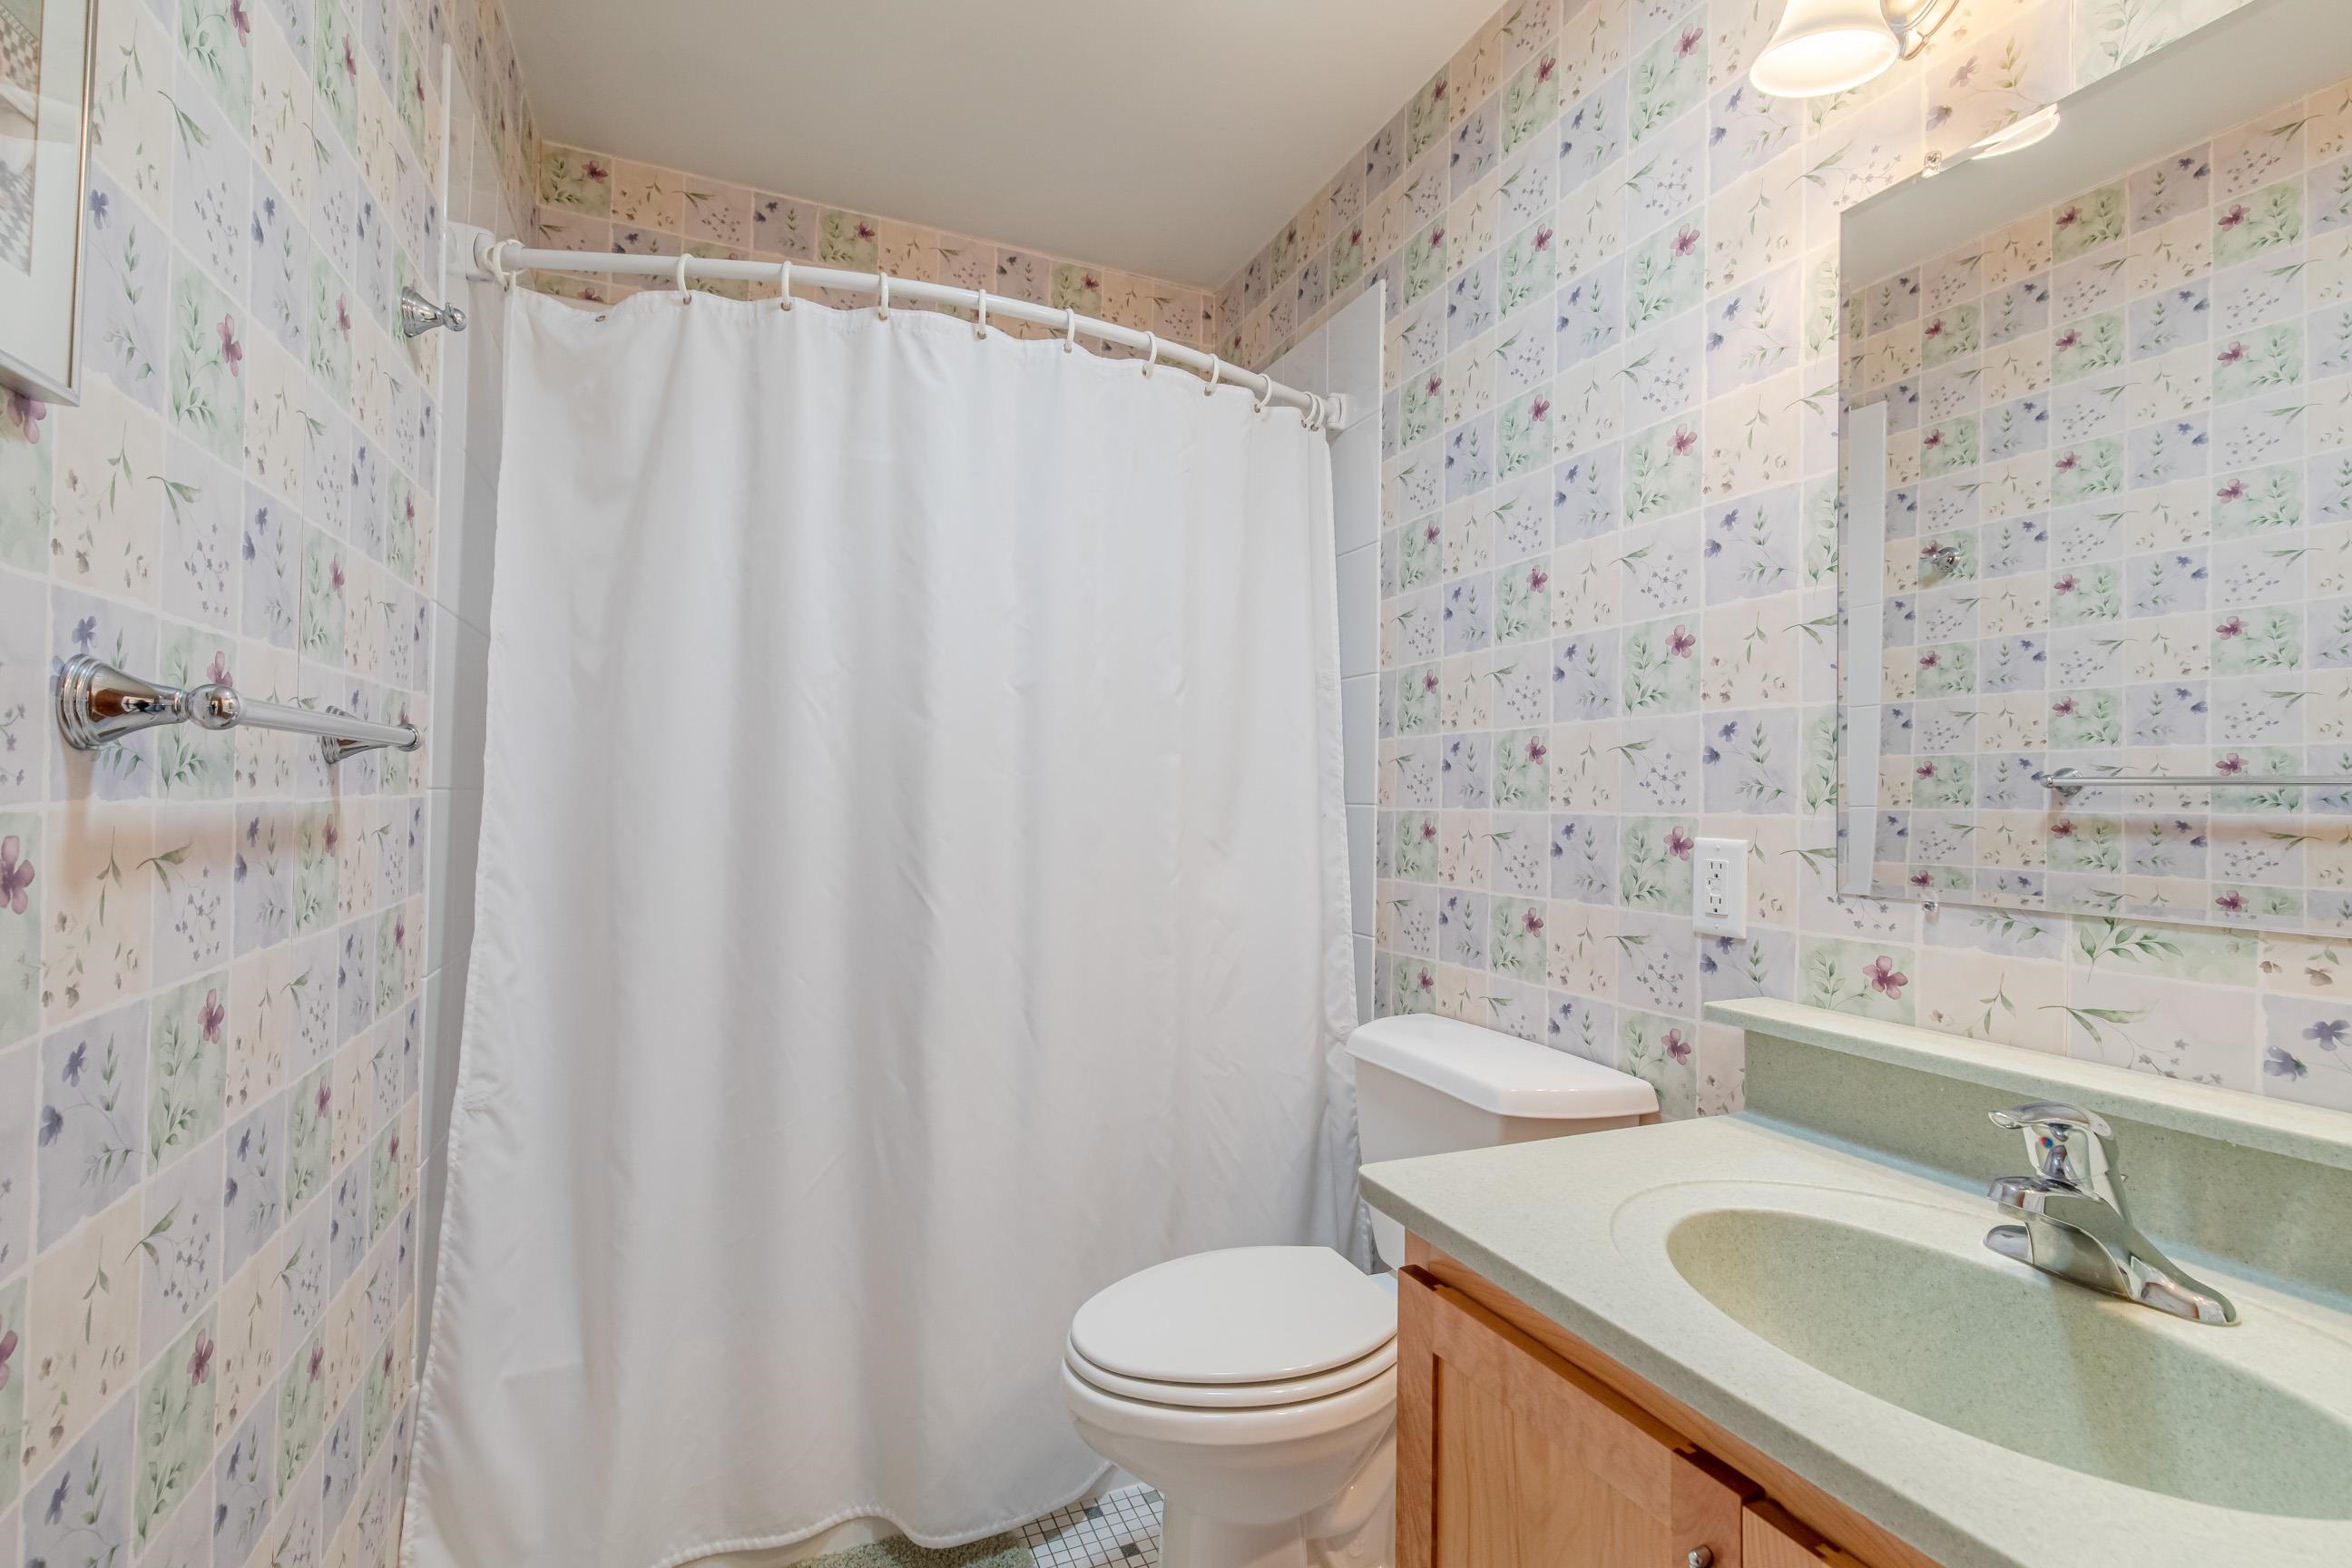 Photo -33 - 733 Dearholt Rd Madison, WI 53711